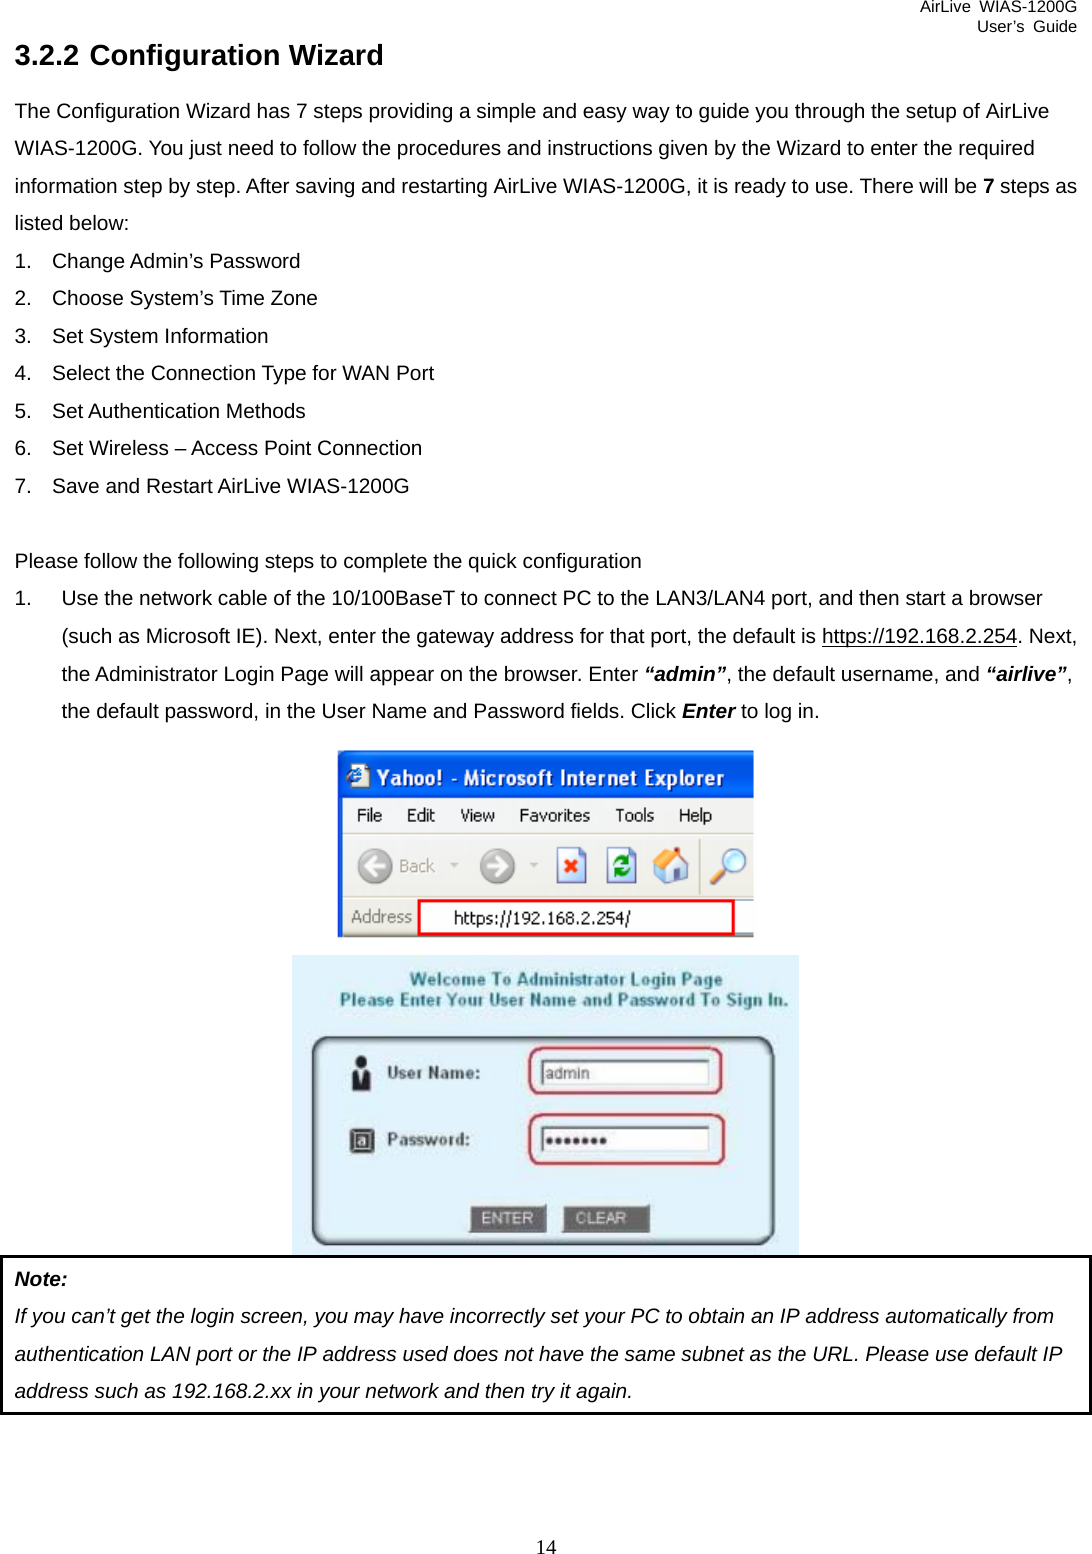 AirLive WIAS-1200G User’s Guide 14 3.2.2 Configuration Wizard The Configuration Wizard has 7 steps providing a simple and easy way to guide you through the setup of AirLive WIAS-1200G. You just need to follow the procedures and instructions given by the Wizard to enter the required information step by step. After saving and restarting AirLive WIAS-1200G, it is ready to use. There will be 7 steps as listed below: 1. Change Admin’s Password 2.  Choose System’s Time Zone 3.  Set System Information 4.  Select the Connection Type for WAN Port 5. Set Authentication Methods 6.  Set Wireless – Access Point Connection 7.  Save and Restart AirLive WIAS-1200G  Please follow the following steps to complete the quick configuration 1.  Use the network cable of the 10/100BaseT to connect PC to the LAN3/LAN4 port, and then start a browser (such as Microsoft IE). Next, enter the gateway address for that port, the default is https://192.168.2.254. Next, the Administrator Login Page will appear on the browser. Enter “admin”, the default username, and “airlive”, the default password, in the User Name and Password fields. Click Enter to log in.     Note:  If you can’t get the login screen, you may have incorrectly set your PC to obtain an IP address automatically from authentication LAN port or the IP address used does not have the same subnet as the URL. Please use default IP address such as 192.168.2.xx in your network and then try it again. 